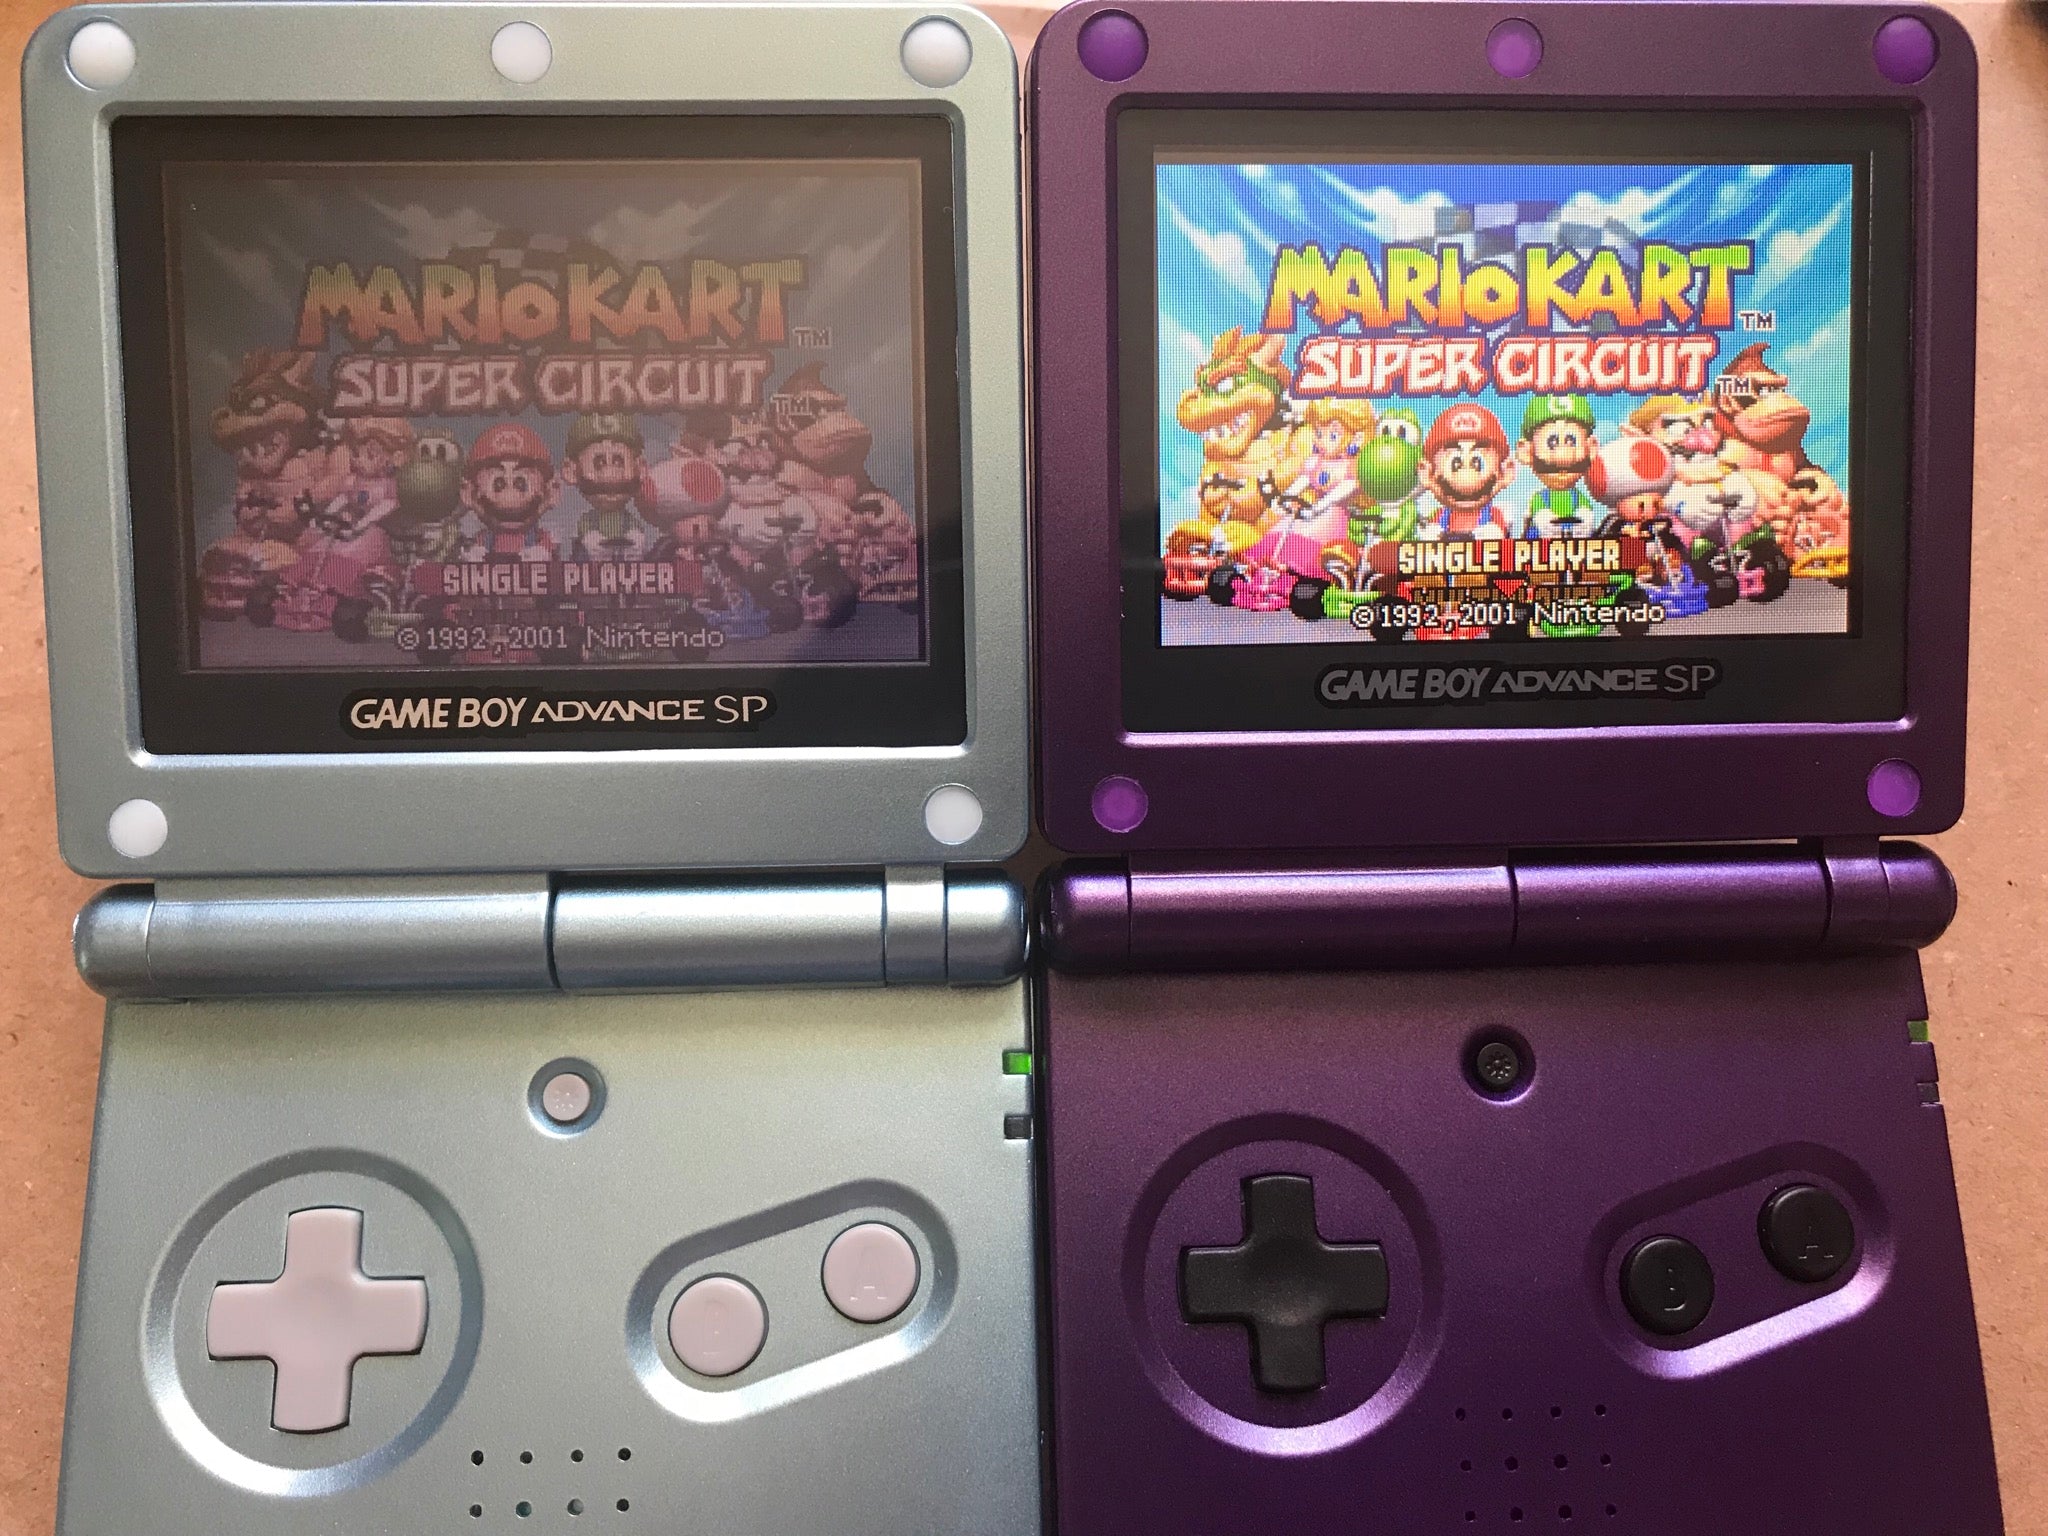 between GBA SP AGS 001 & AGS